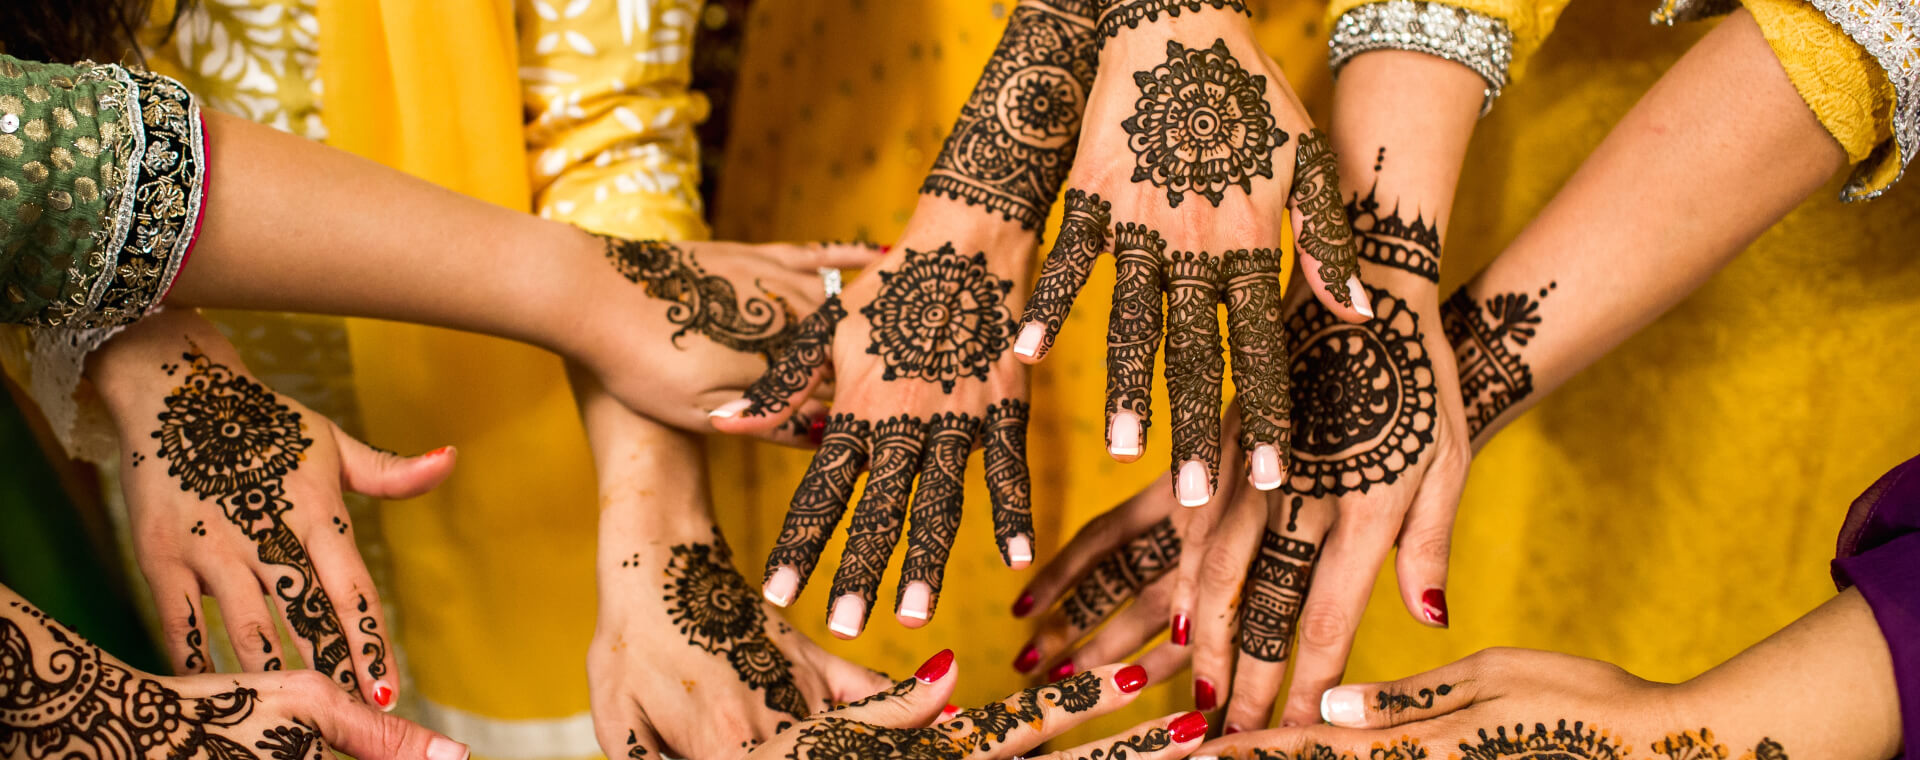 A group of women with henna tattoos on their hands.